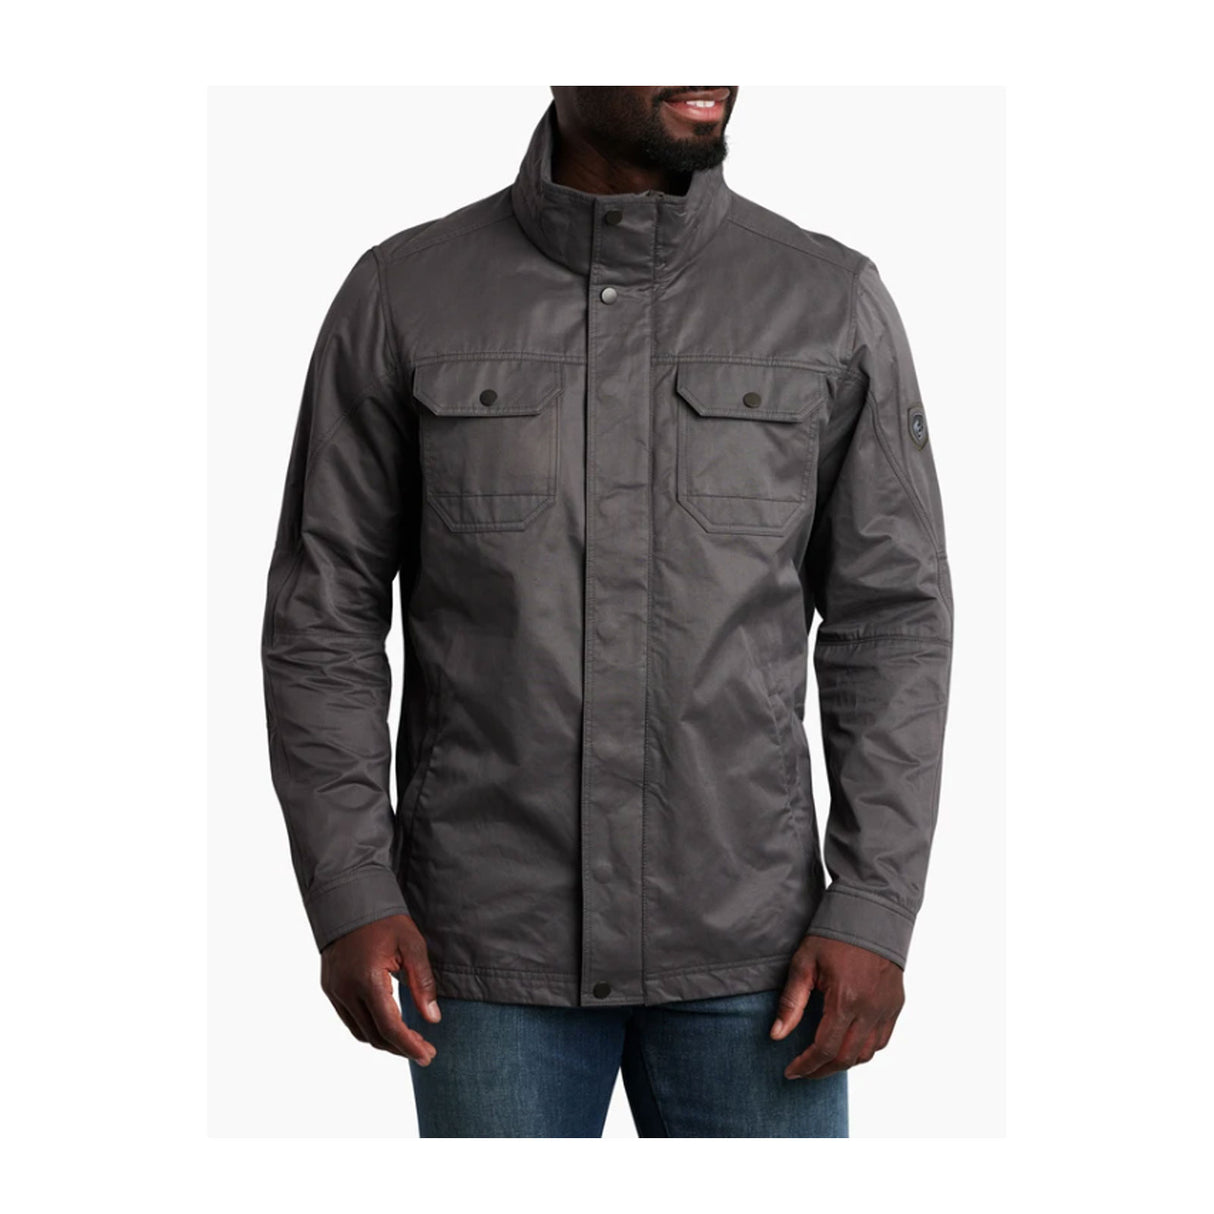 Kuhl Kollusion Jacket (Men) - Carbon Outerwear - Jacket - Casual Jacket - The Heel Shoe Fitters